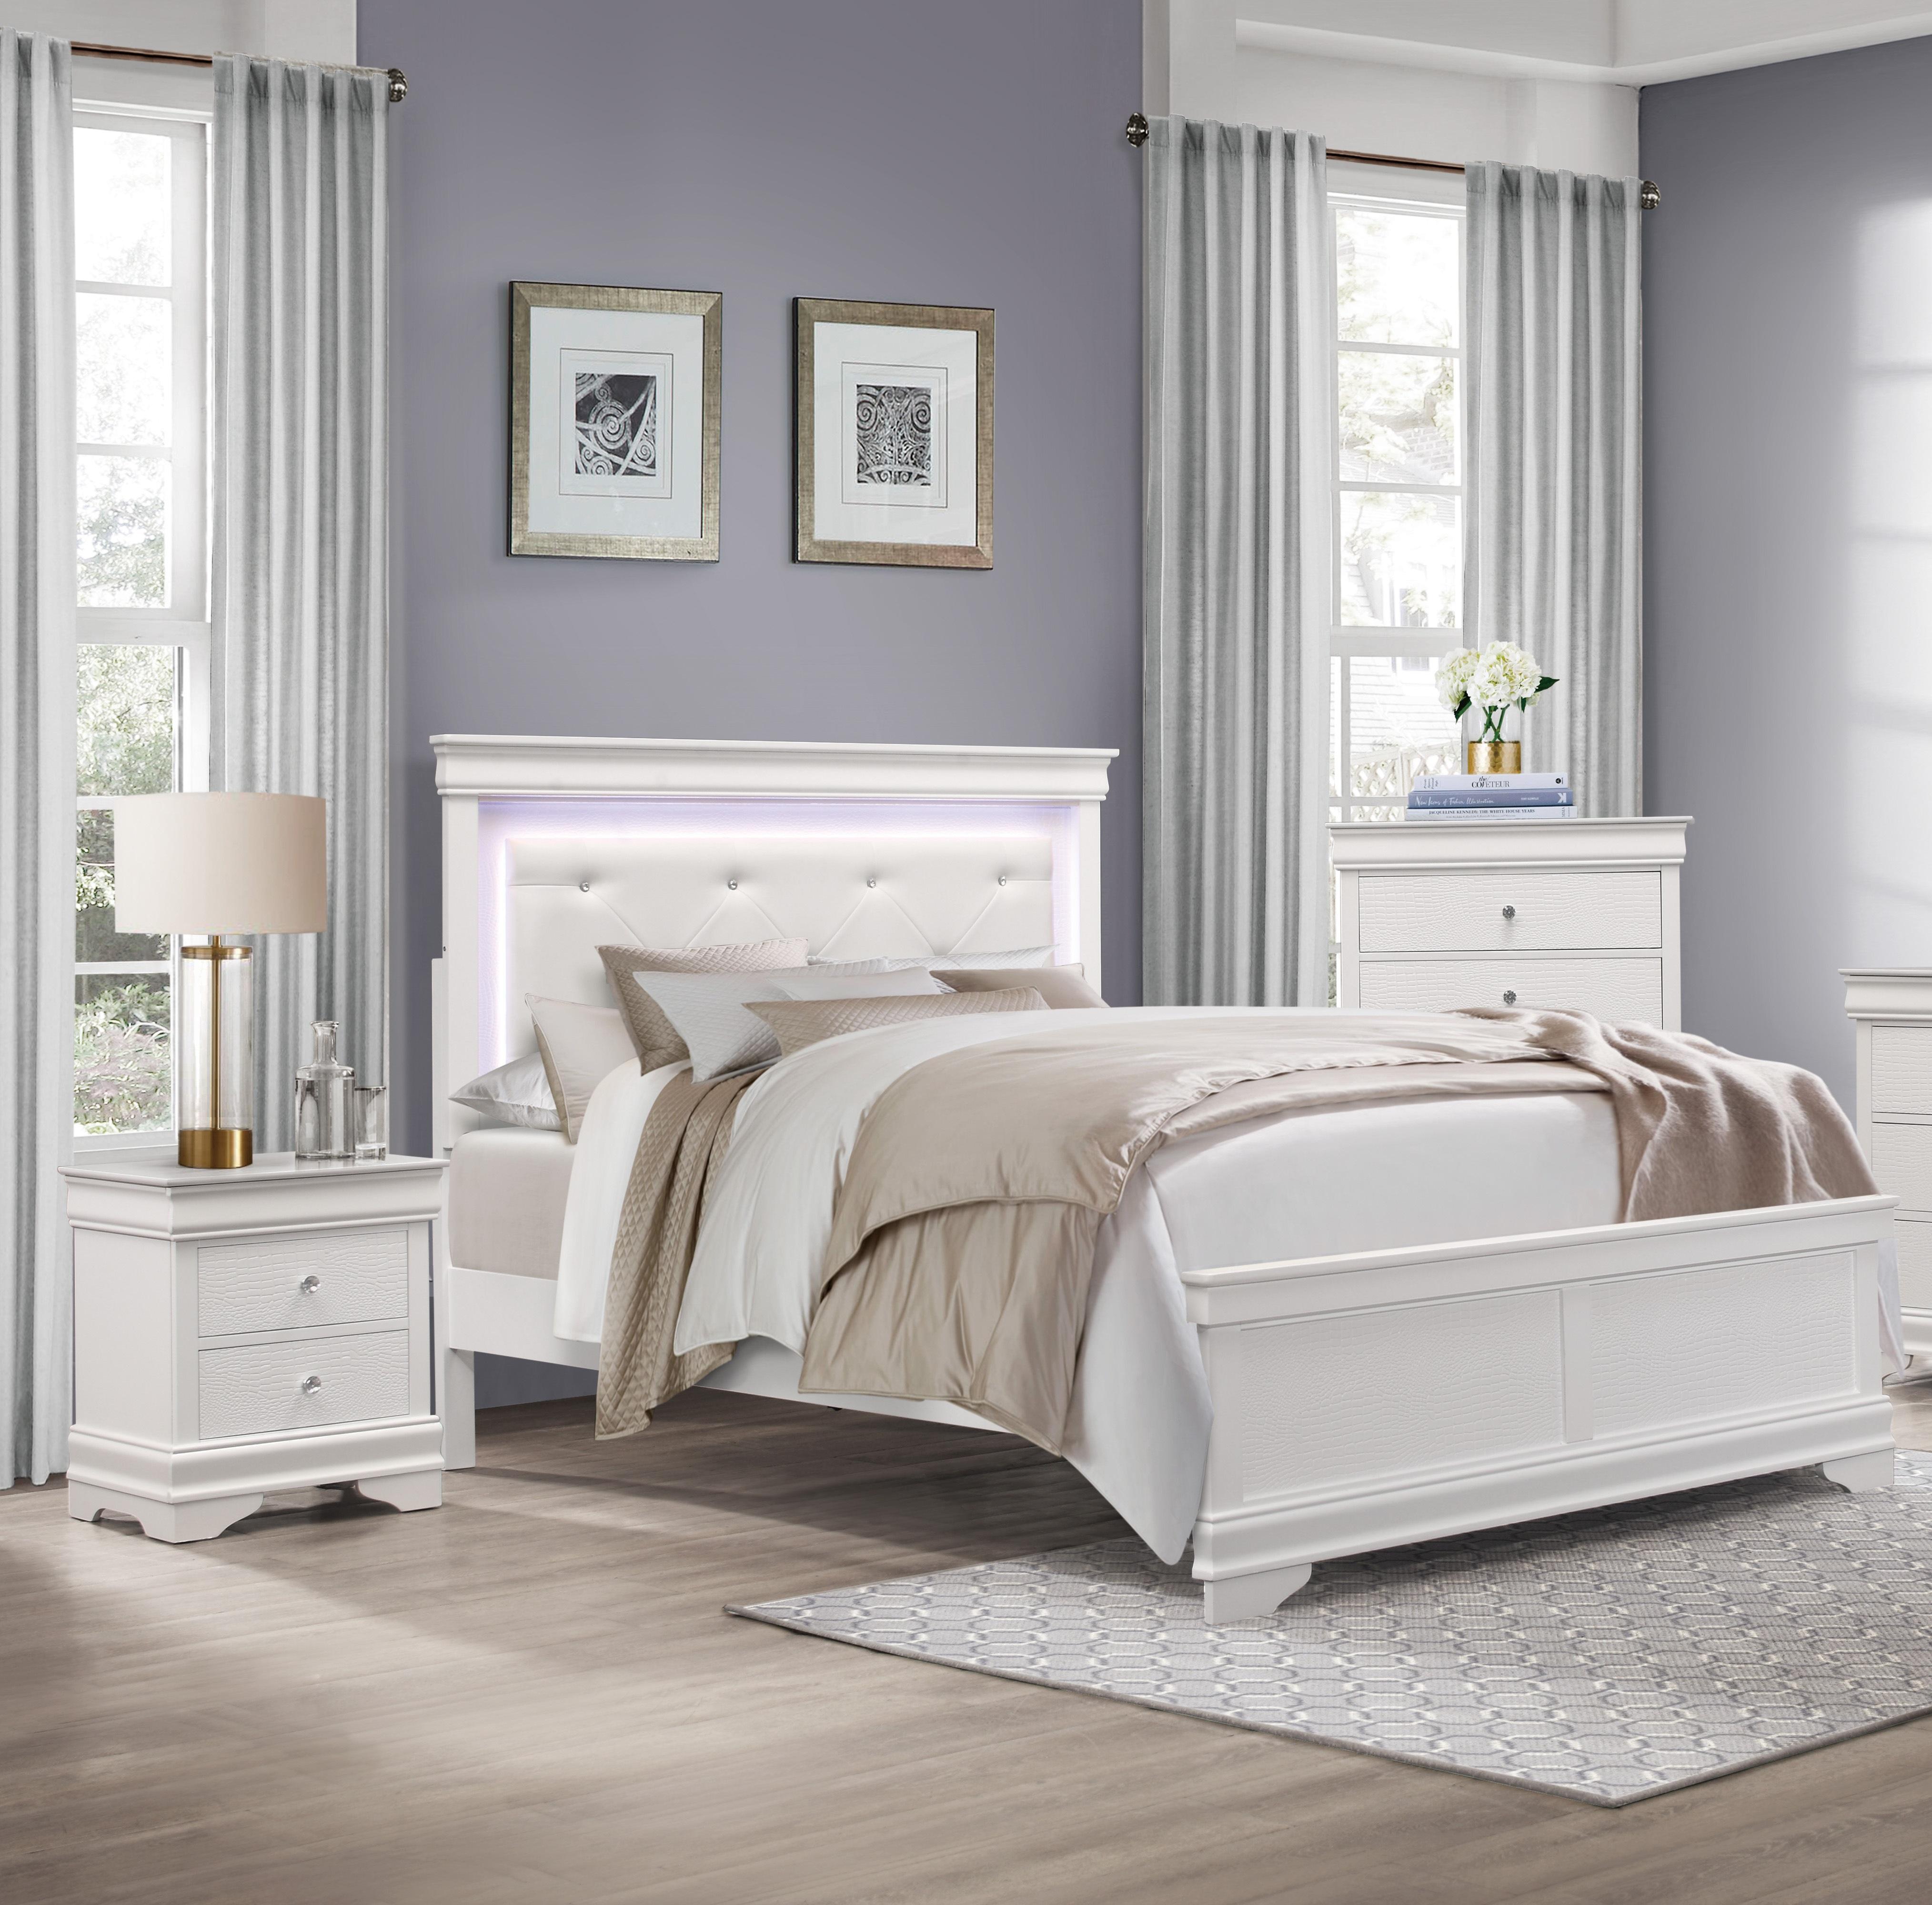 

    
Traditional White Wood Queen Bedroom Set 3pcs Homelegance 1556W-1* Lana
